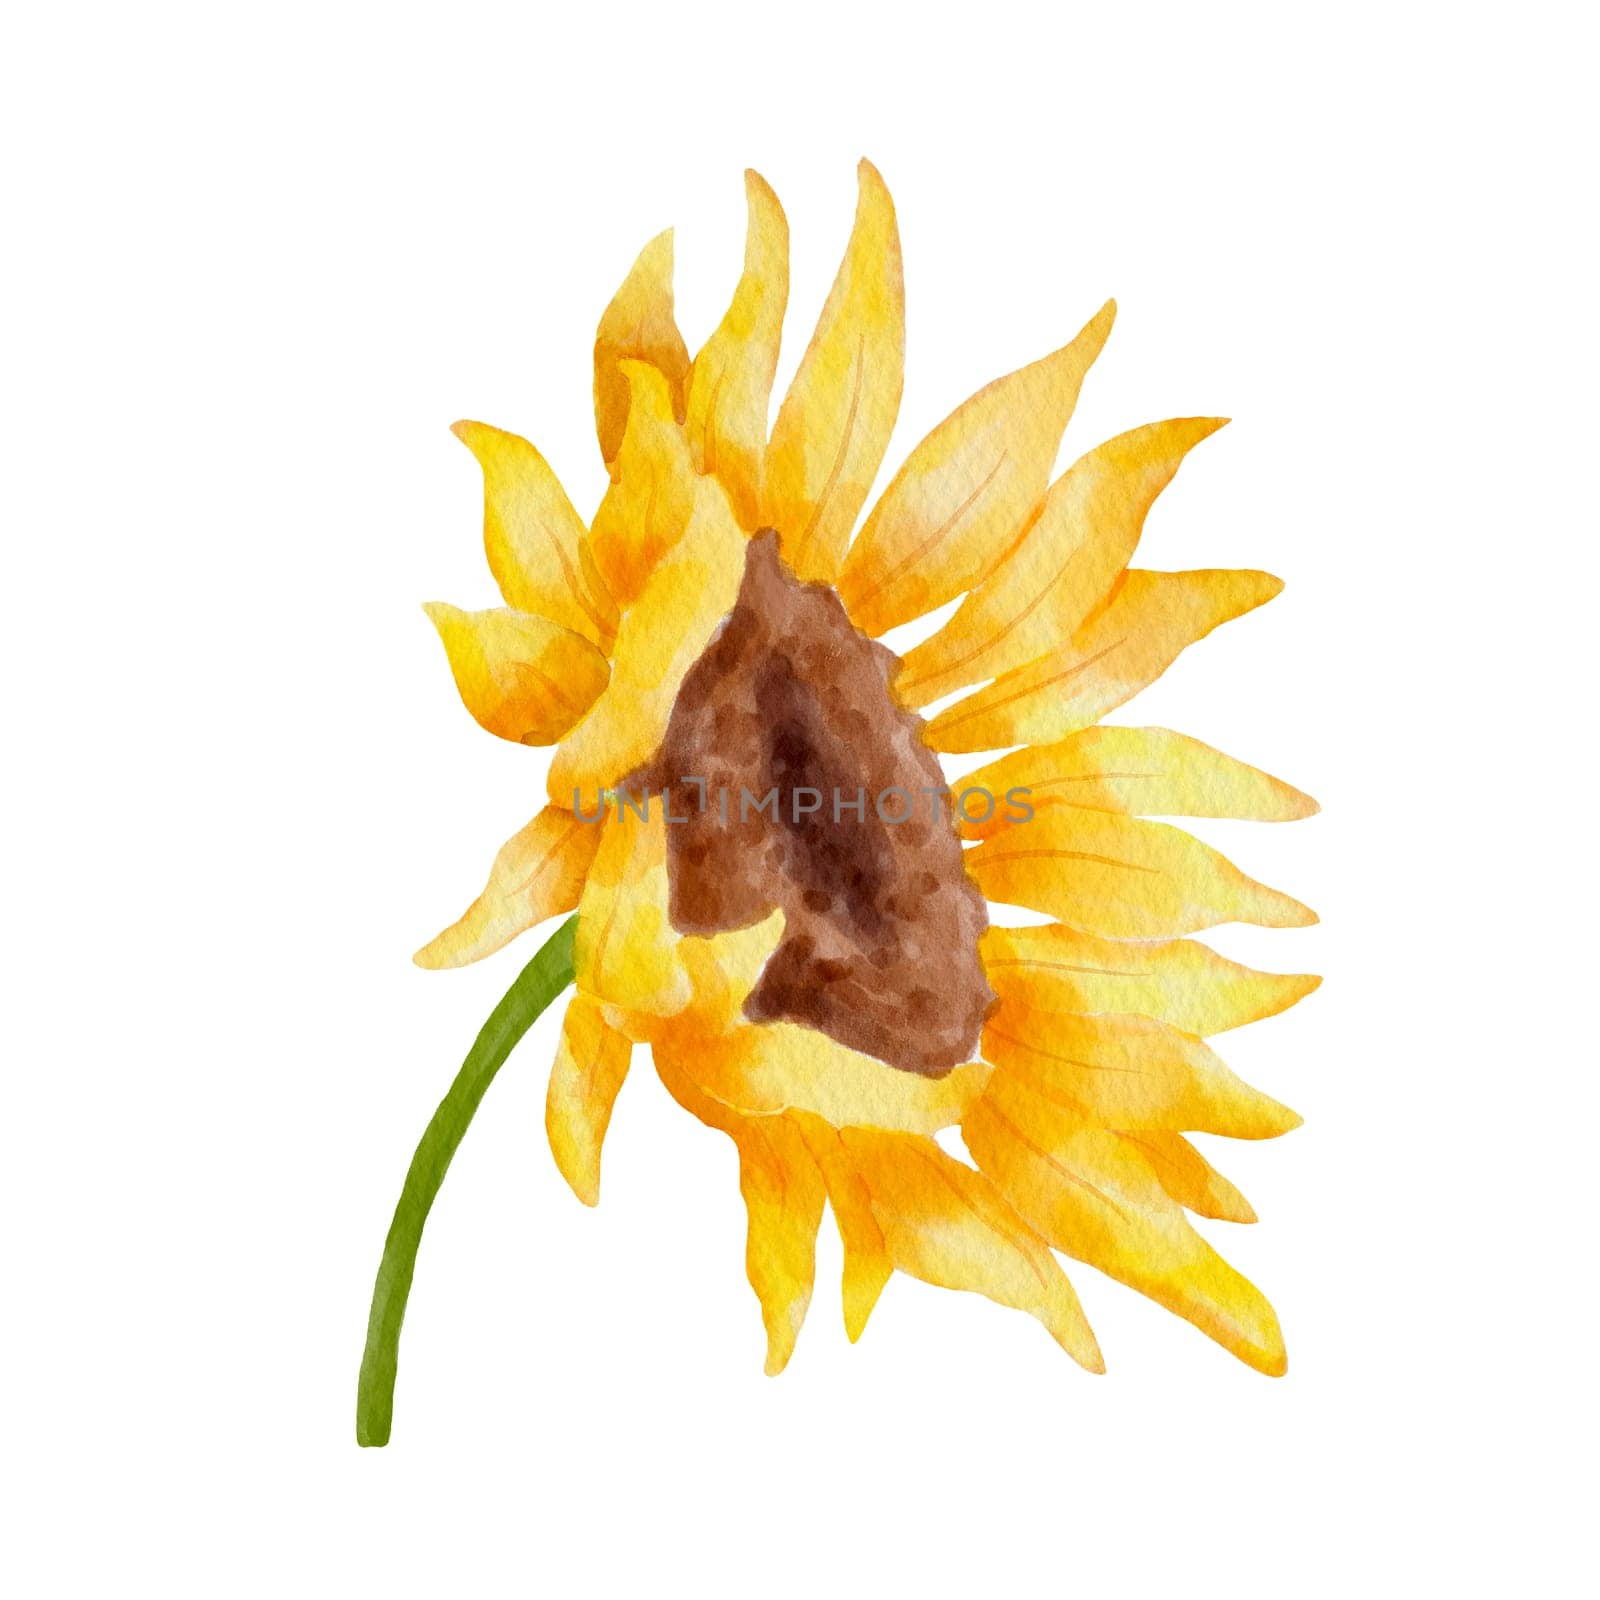 Watercolor sunflower. Colorful botanical hand drawn flower illustration isolated on white by ElenaPlatova